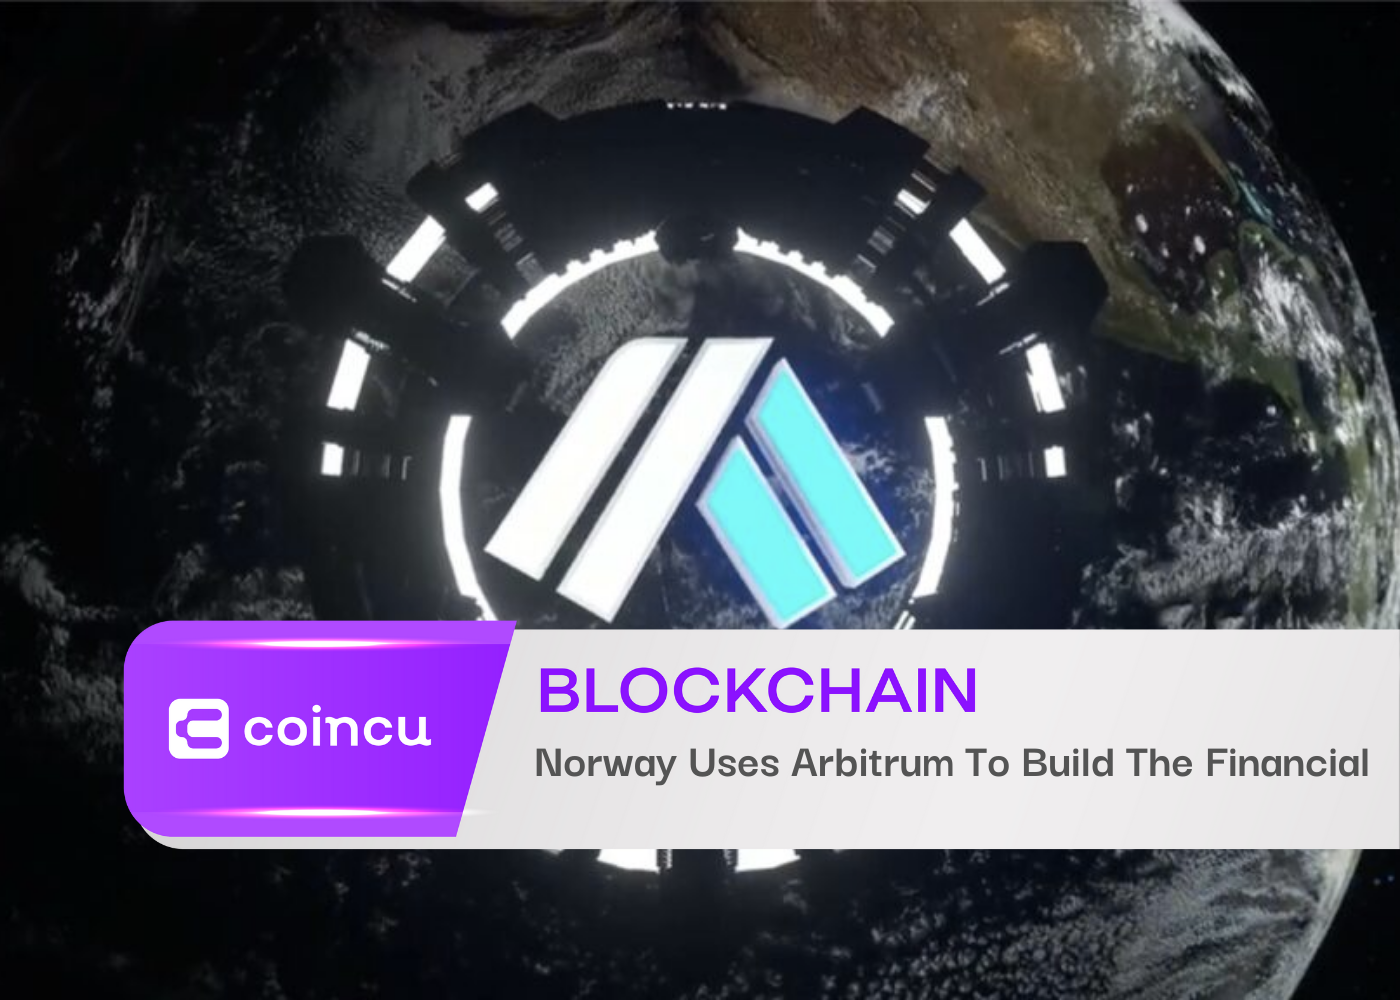 Norway Uses Arbitrum To Build The Financial